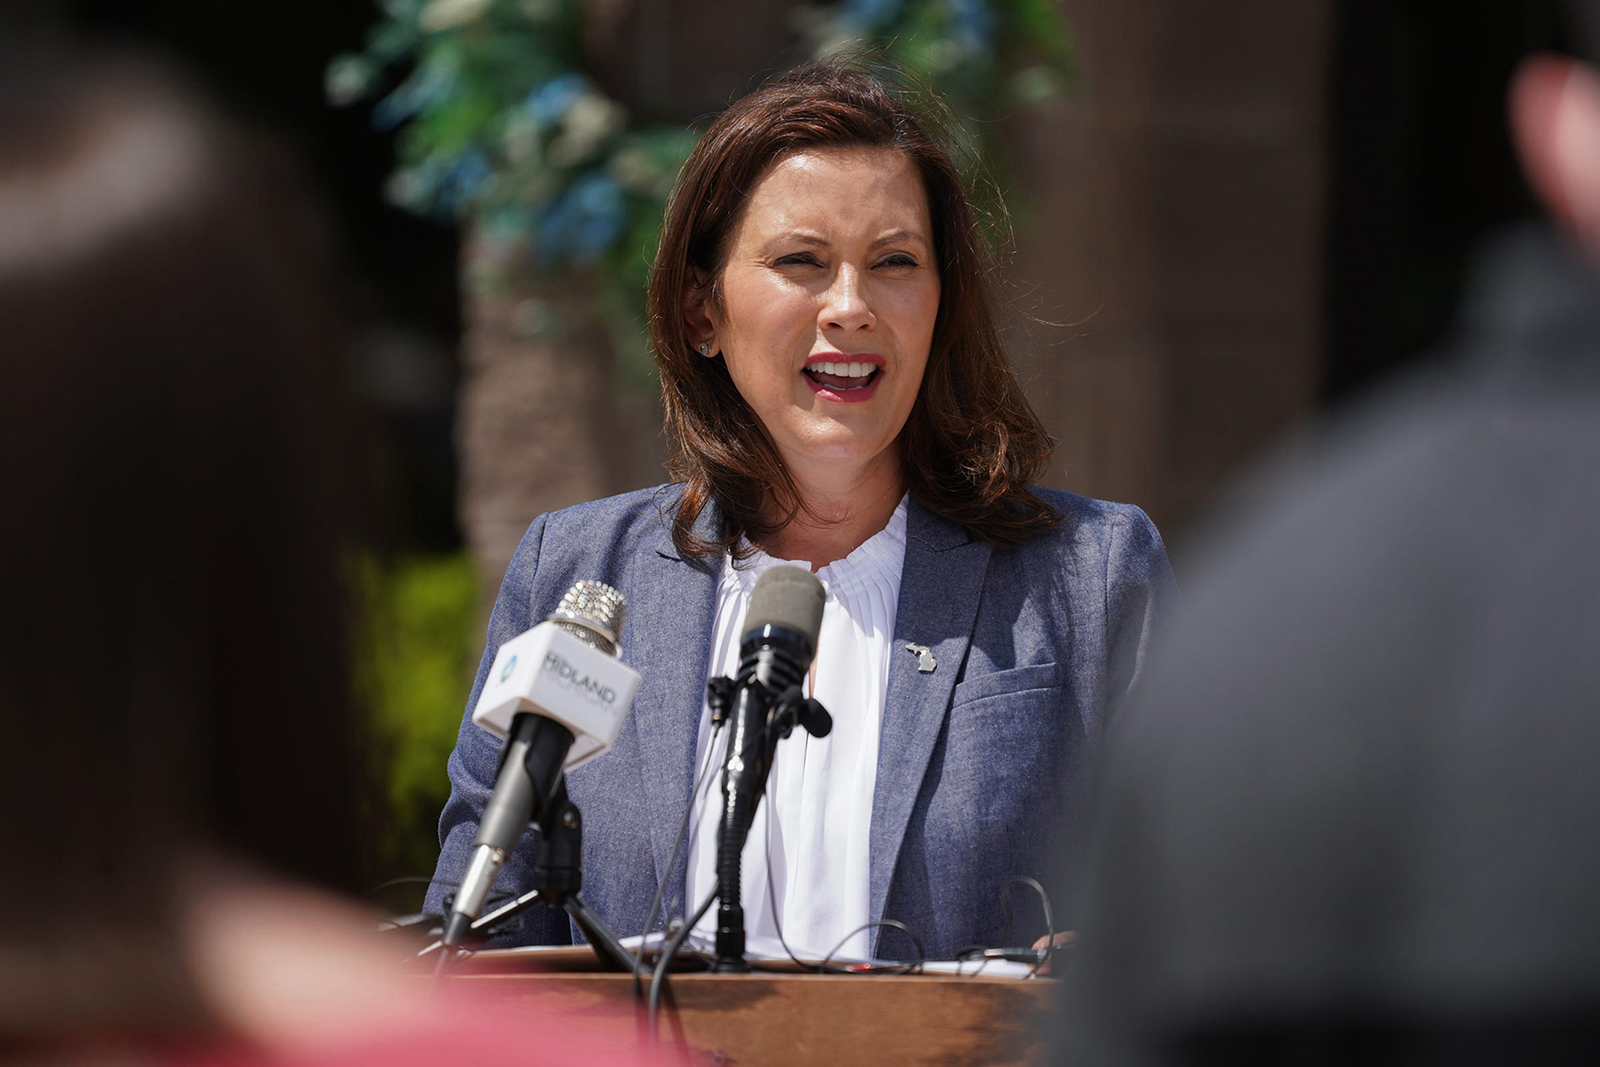 PHOTO: Michigan Gov. Gretchen Whitmer speaks to media outside of Meridian Elementary School in Sanford, Mich., May 27, 2020.